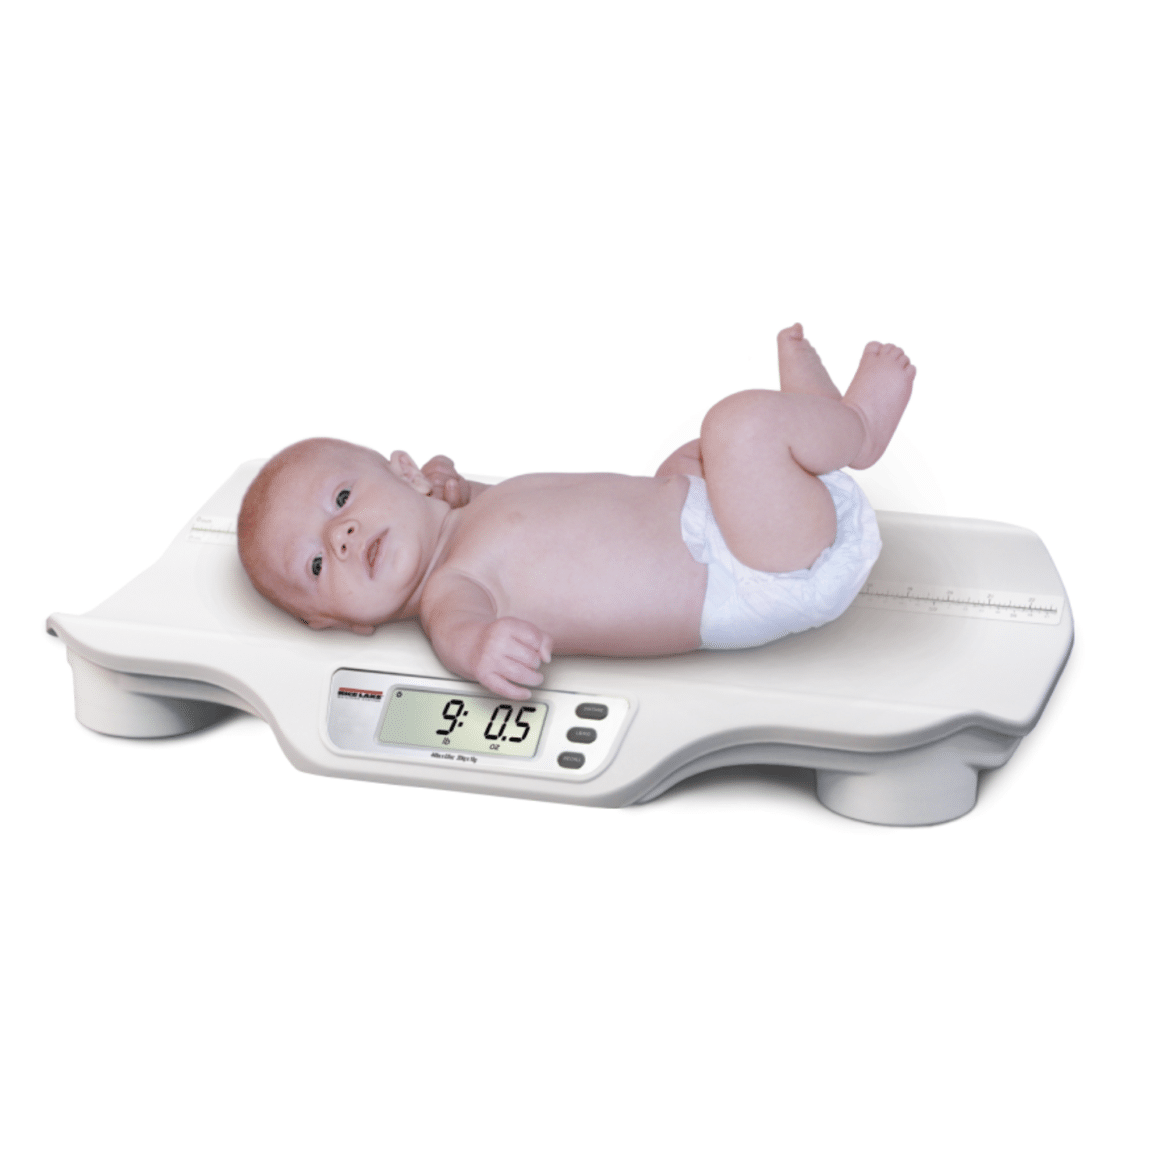 Rice Lake RL-DBS-2 Baby Scale – WEIGH AND MEASURE, LLC, Stadiometers, Measuring Boards, Scales, Calipers